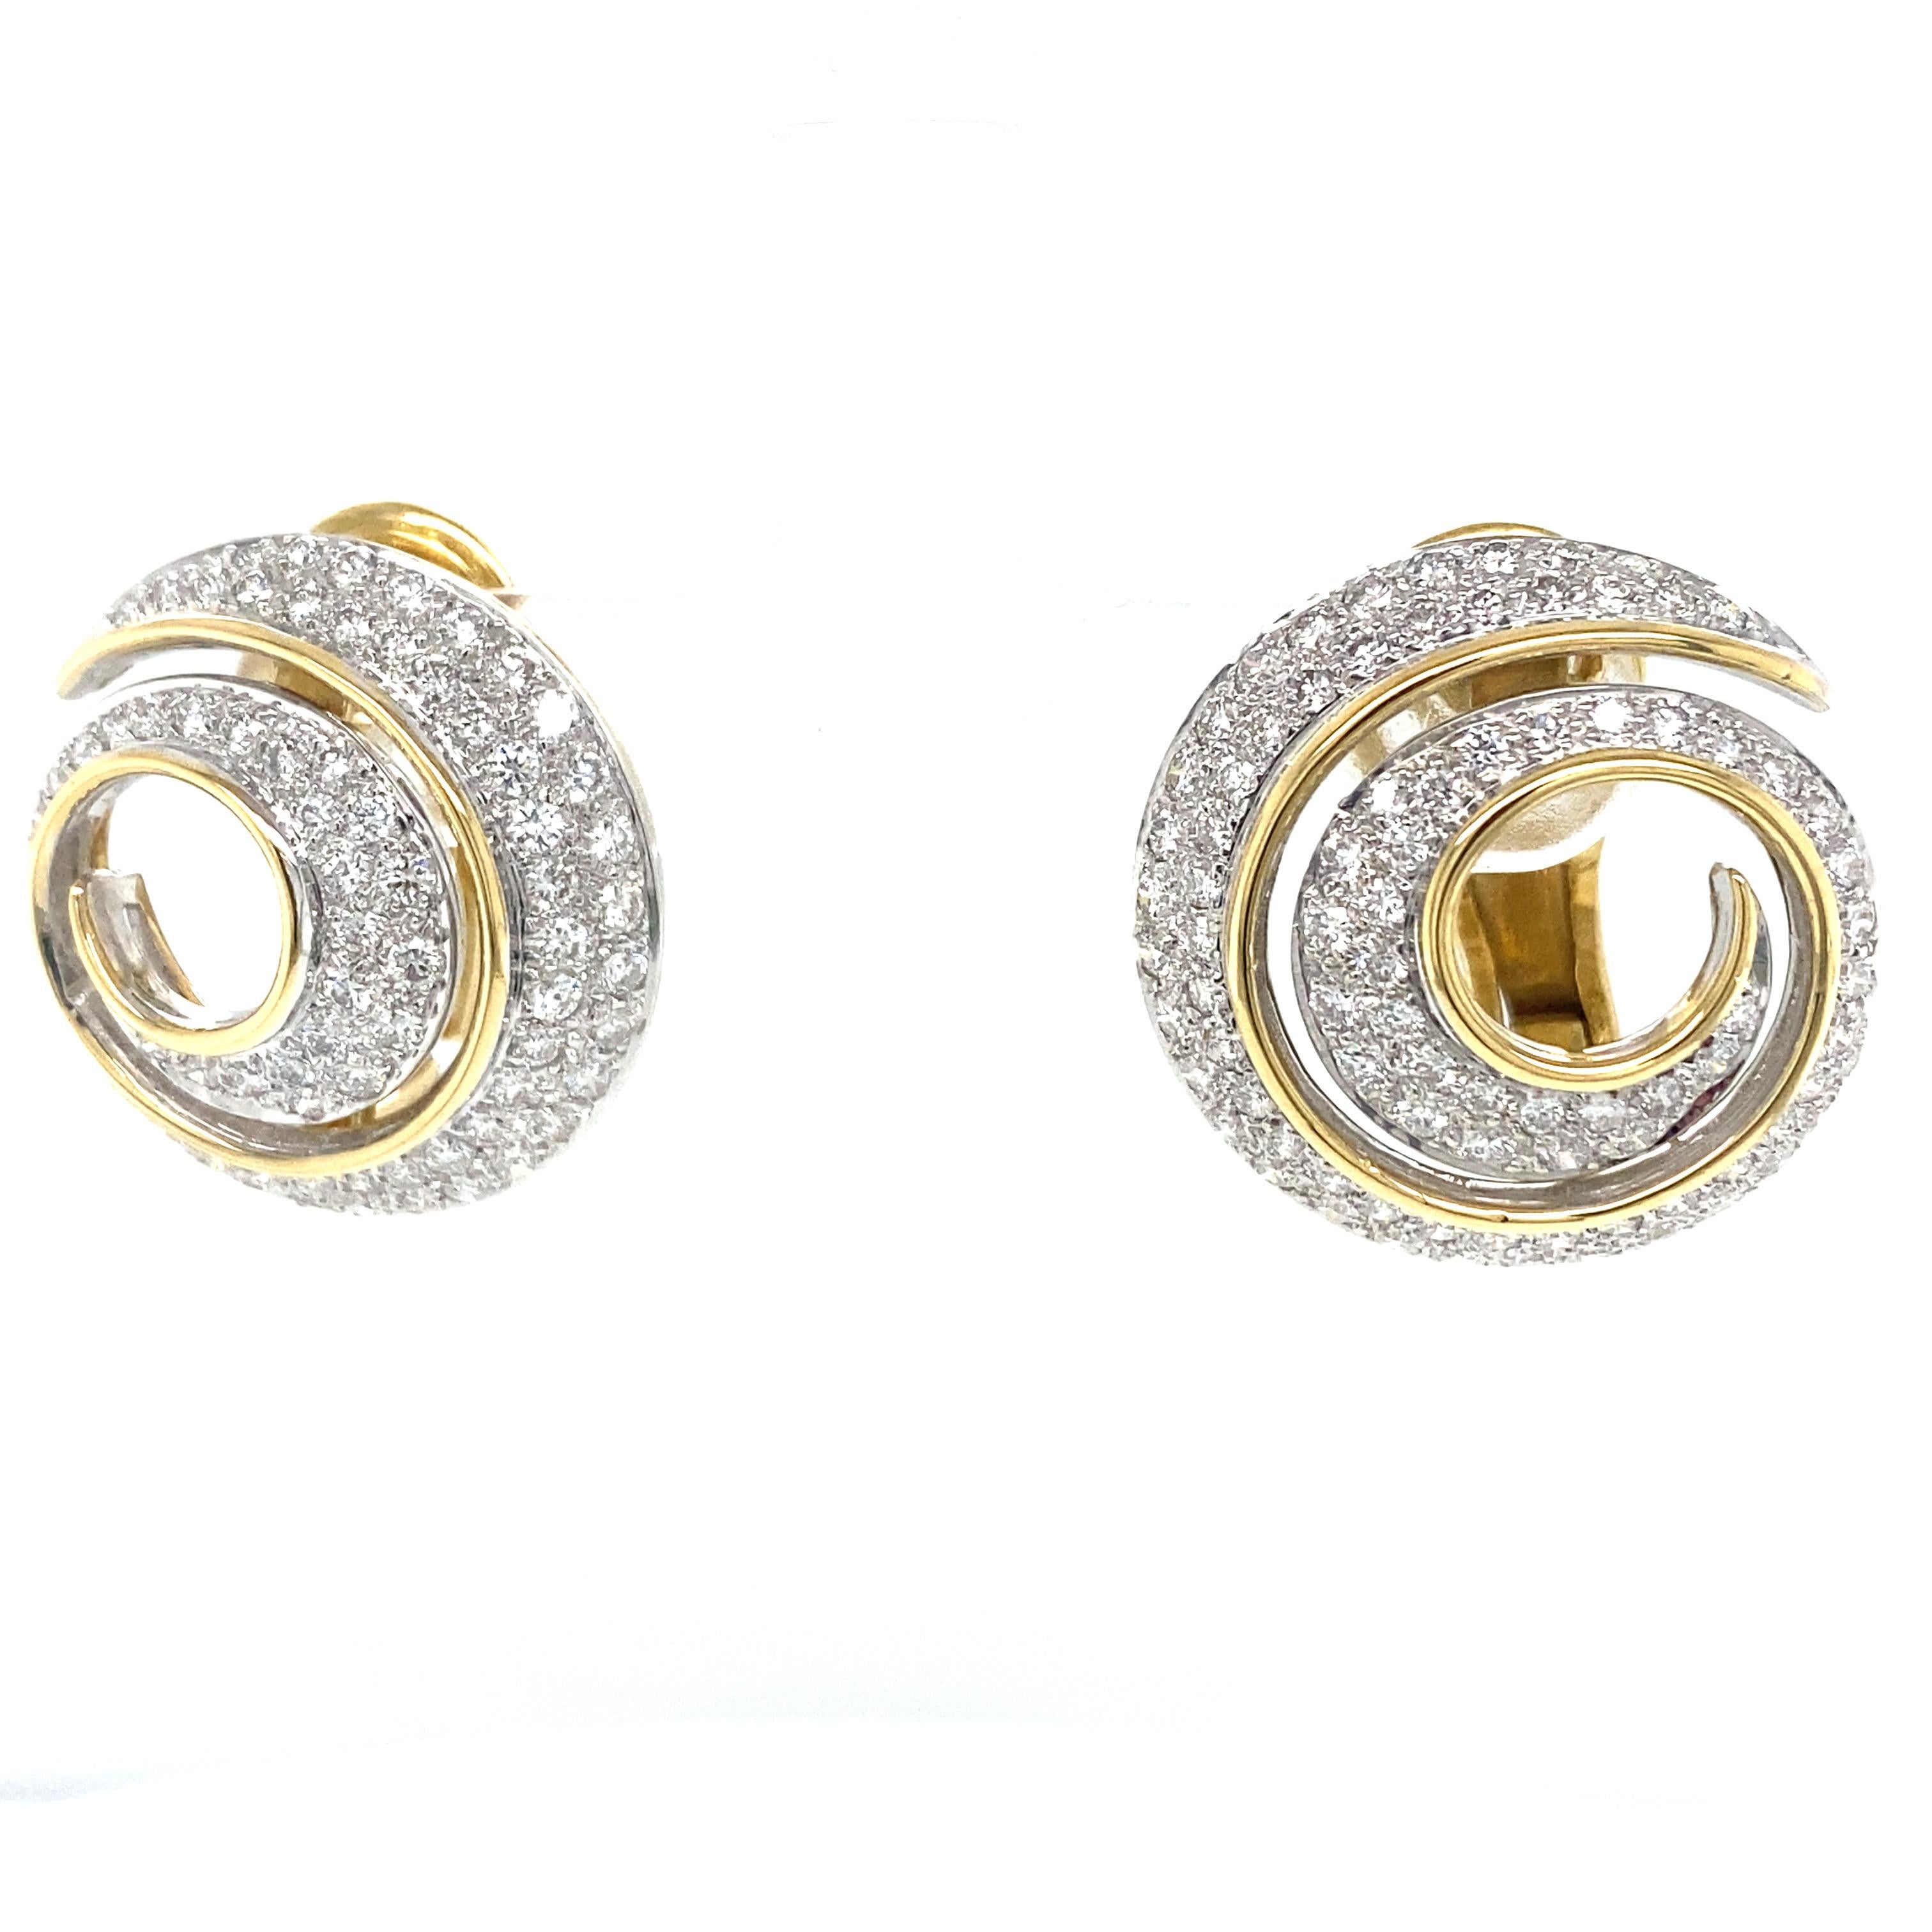 18k Yellow Gold and Platinum Handmade Diamond Swirl Button Earrings For Sale 2